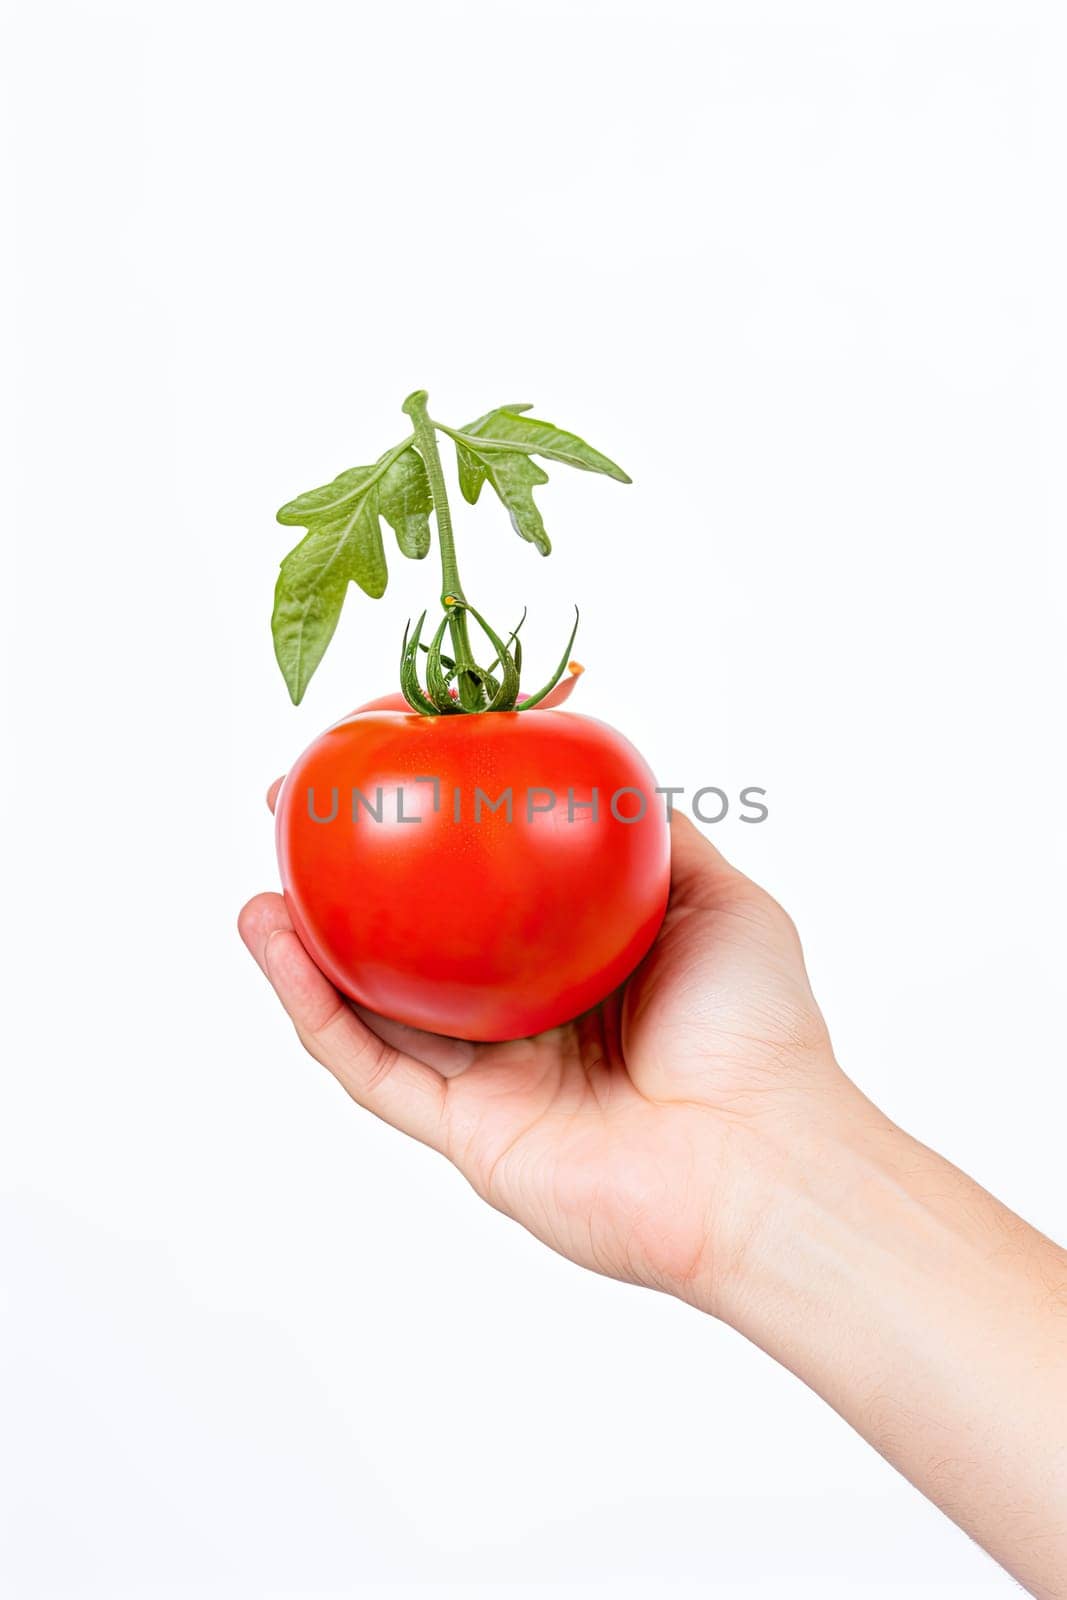 Human hand holding a fresh tomato isolated on white background.